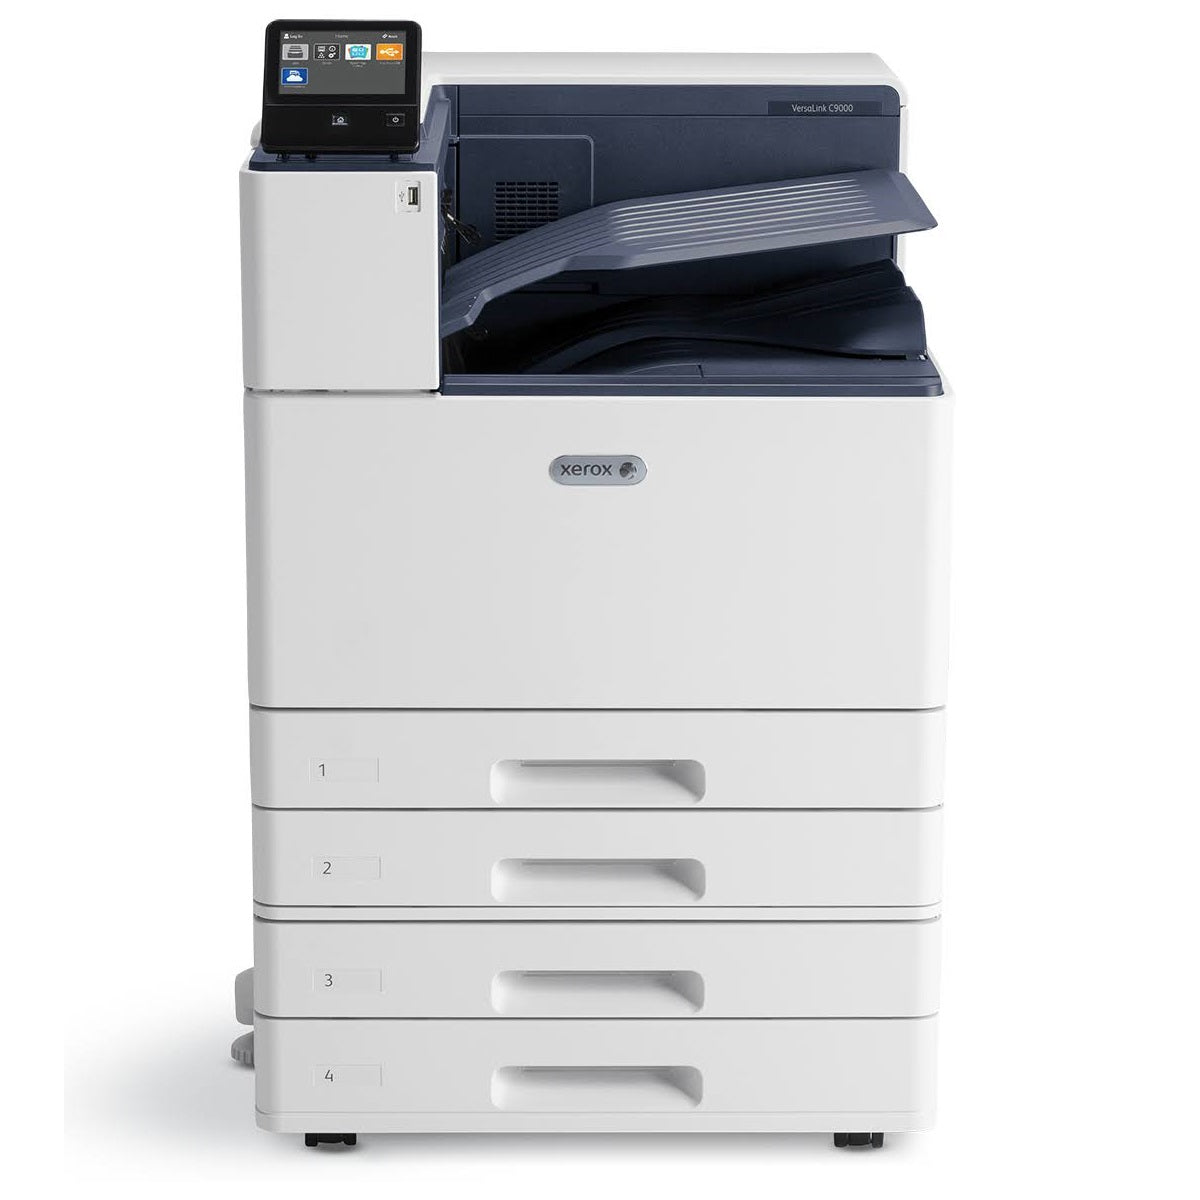 Xerox VersaLink C8000DT C8000/DT Color Tabloid LED Laser Printer, 110 Volt, 2-Sided Printing With Two Trays And Booklet Maker Finisher